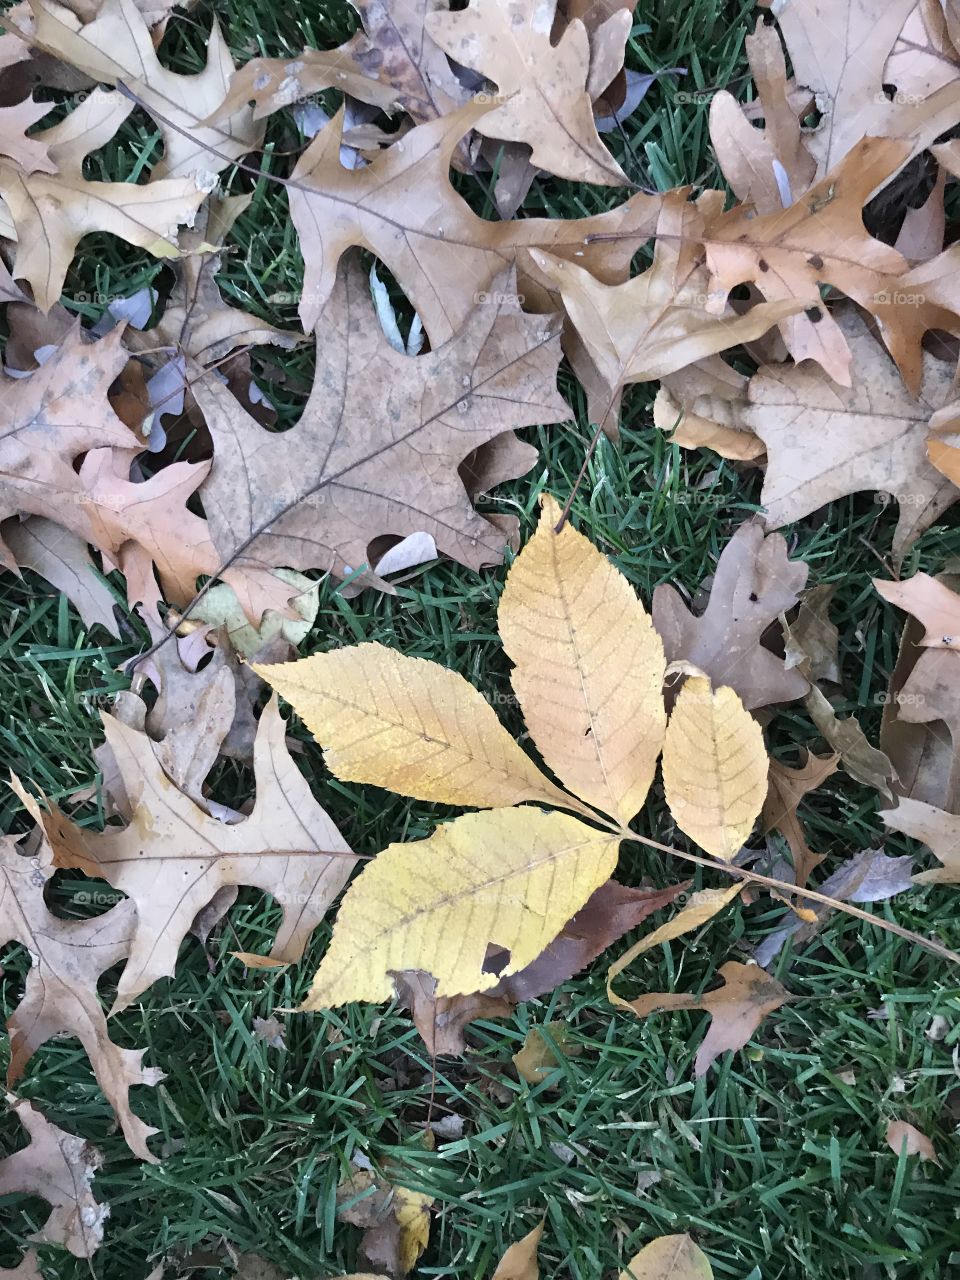 The different kinds of leaves that you find on the ground!